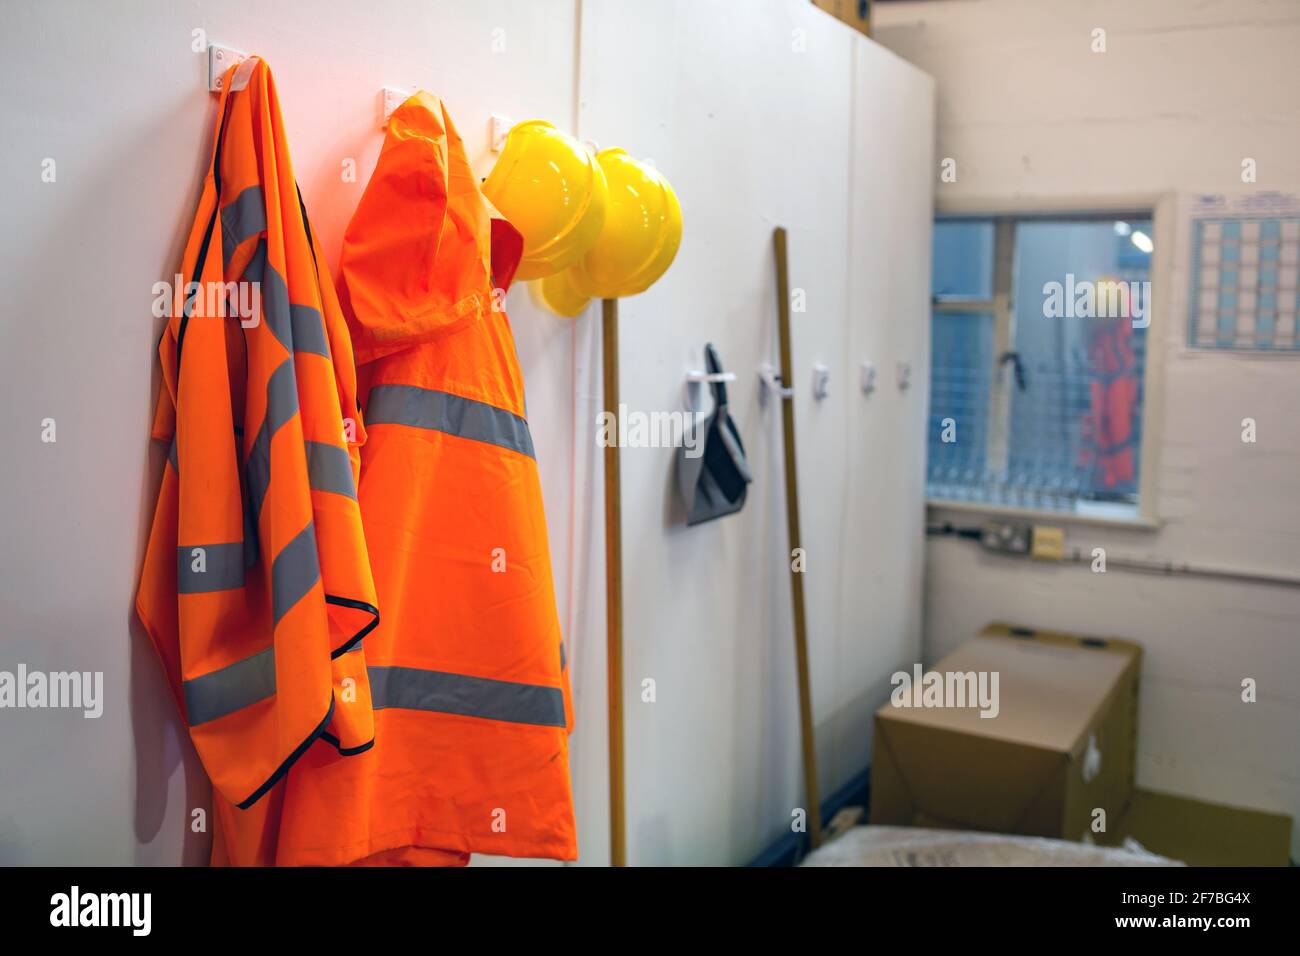 High visibility protective clothing and hard hats hanging up in a warehouse for easy access for the workers. Warehouse, stores, safety gear concept Stock Photo